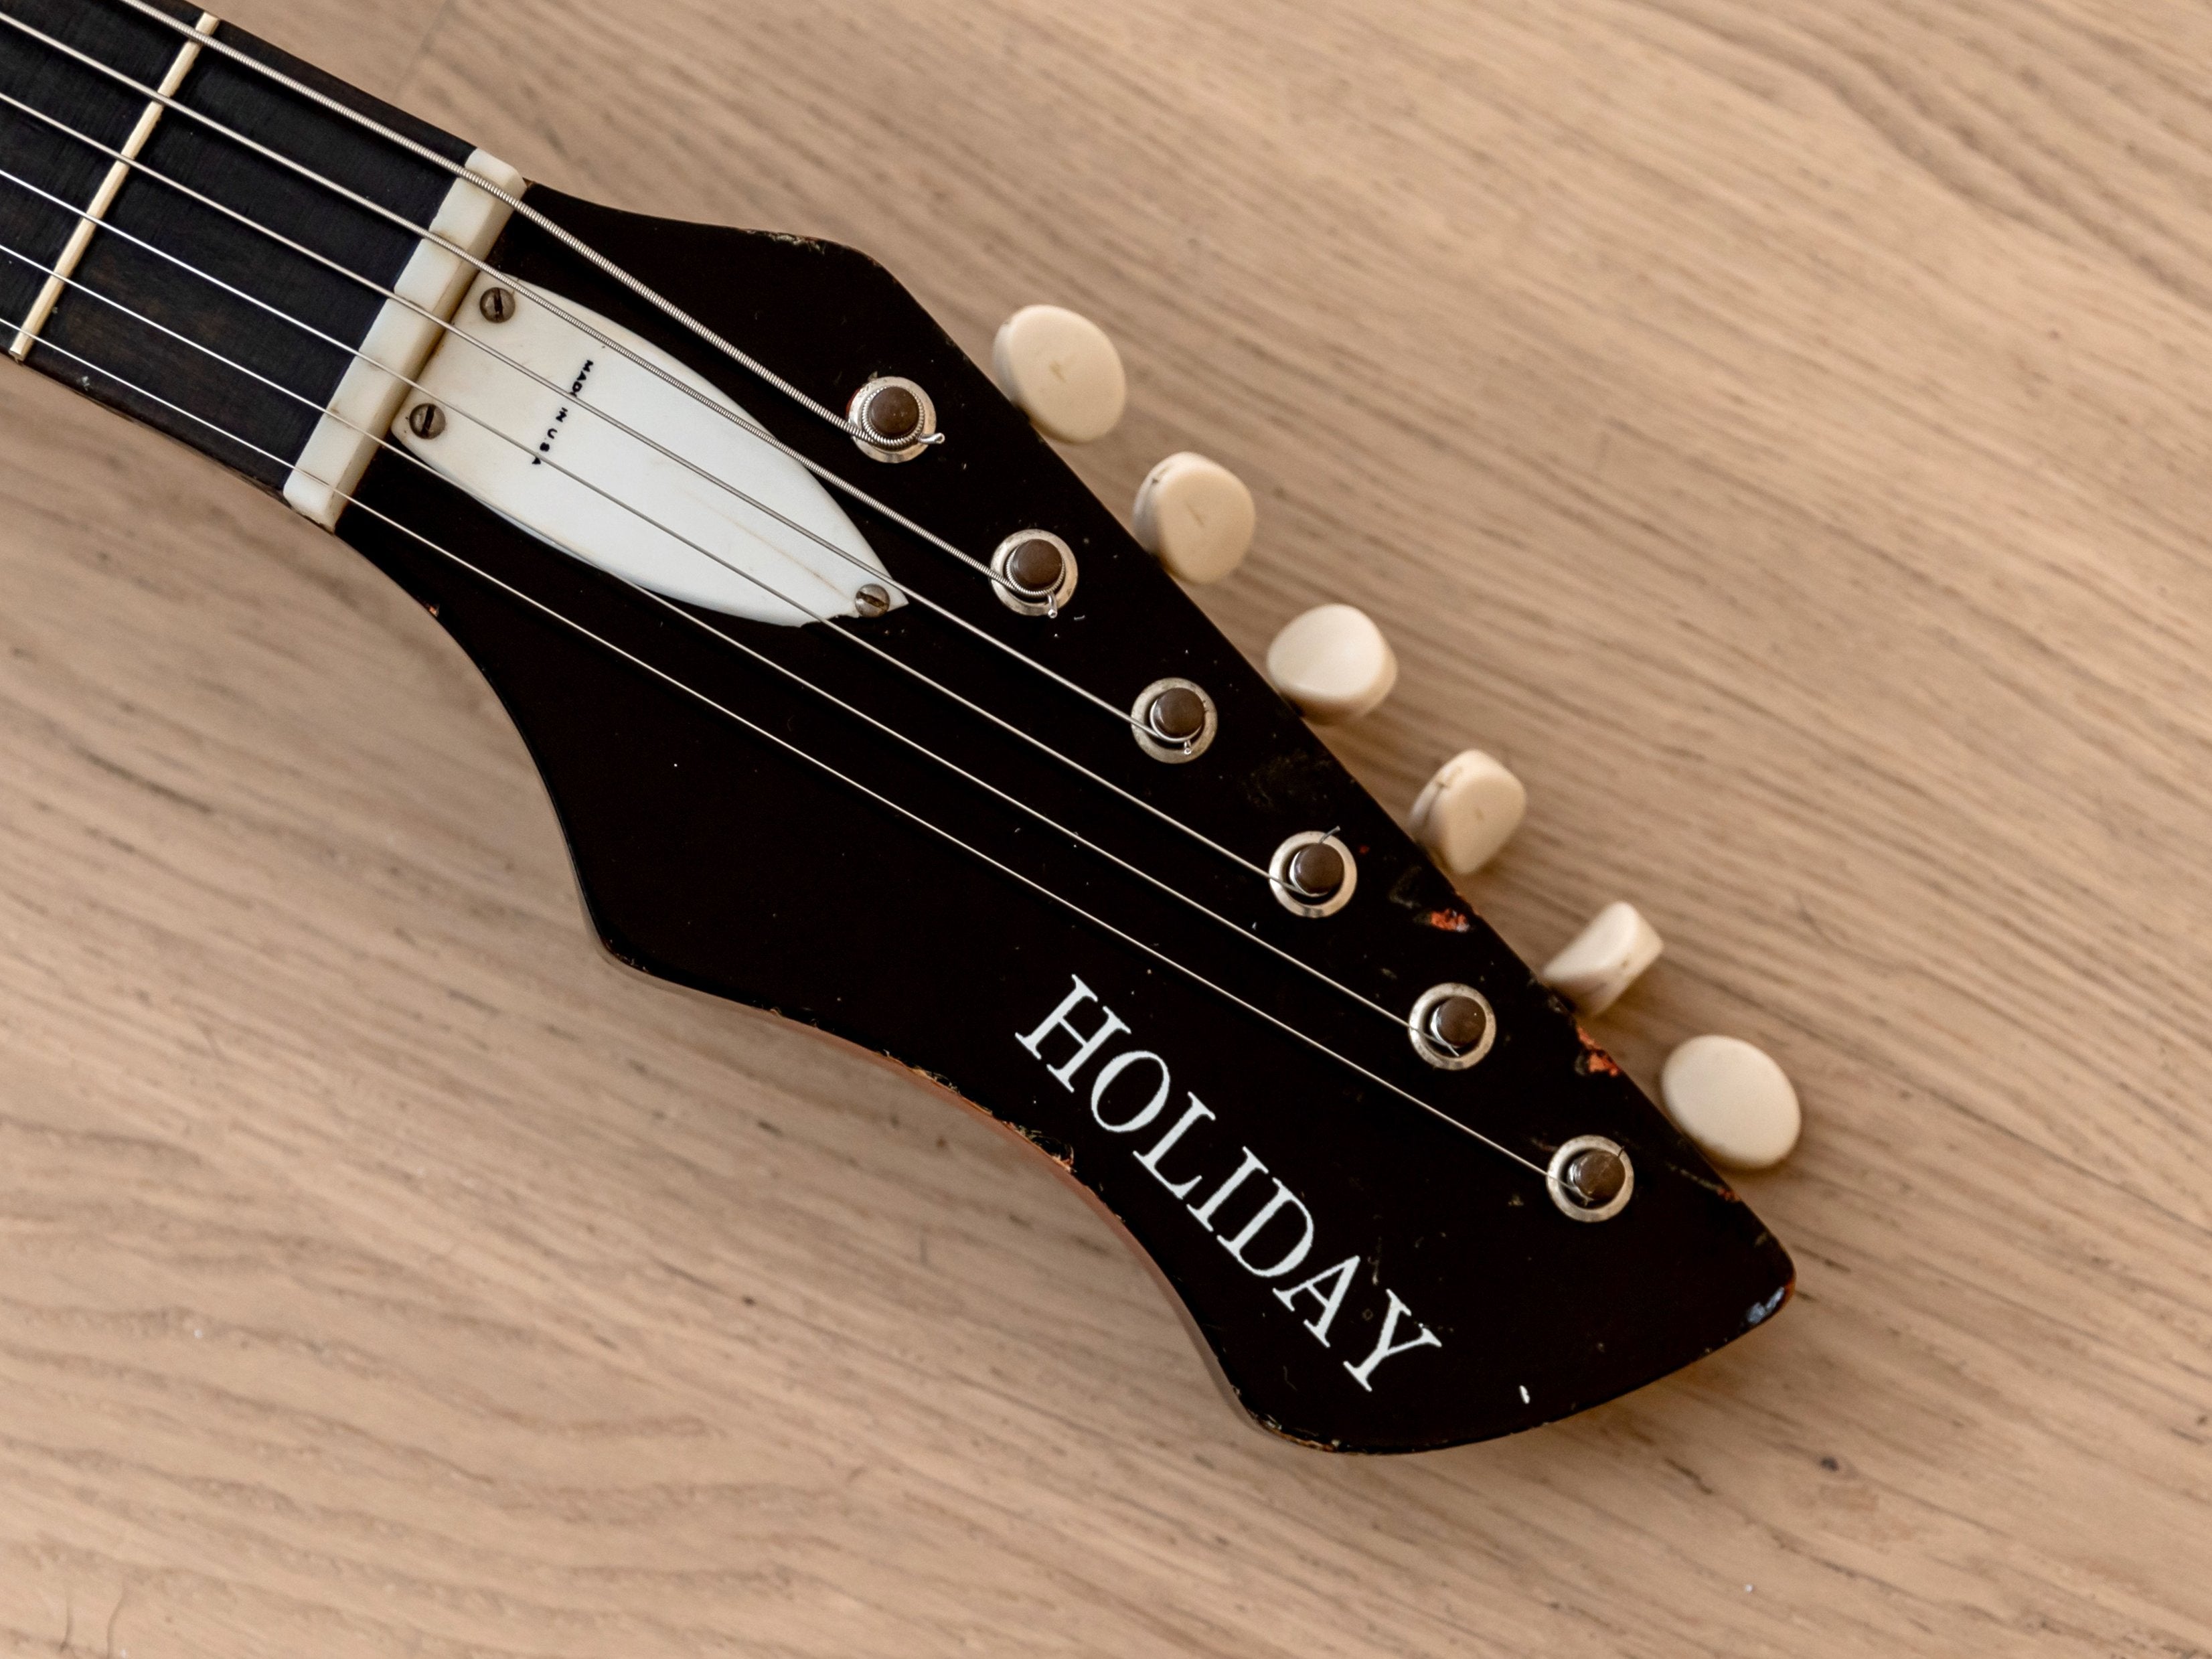 1967 Harmony Silhouette H17 Holiday-Branded Vintage Electric Guitar w/ DeArmond Gold Foils, Bobkat